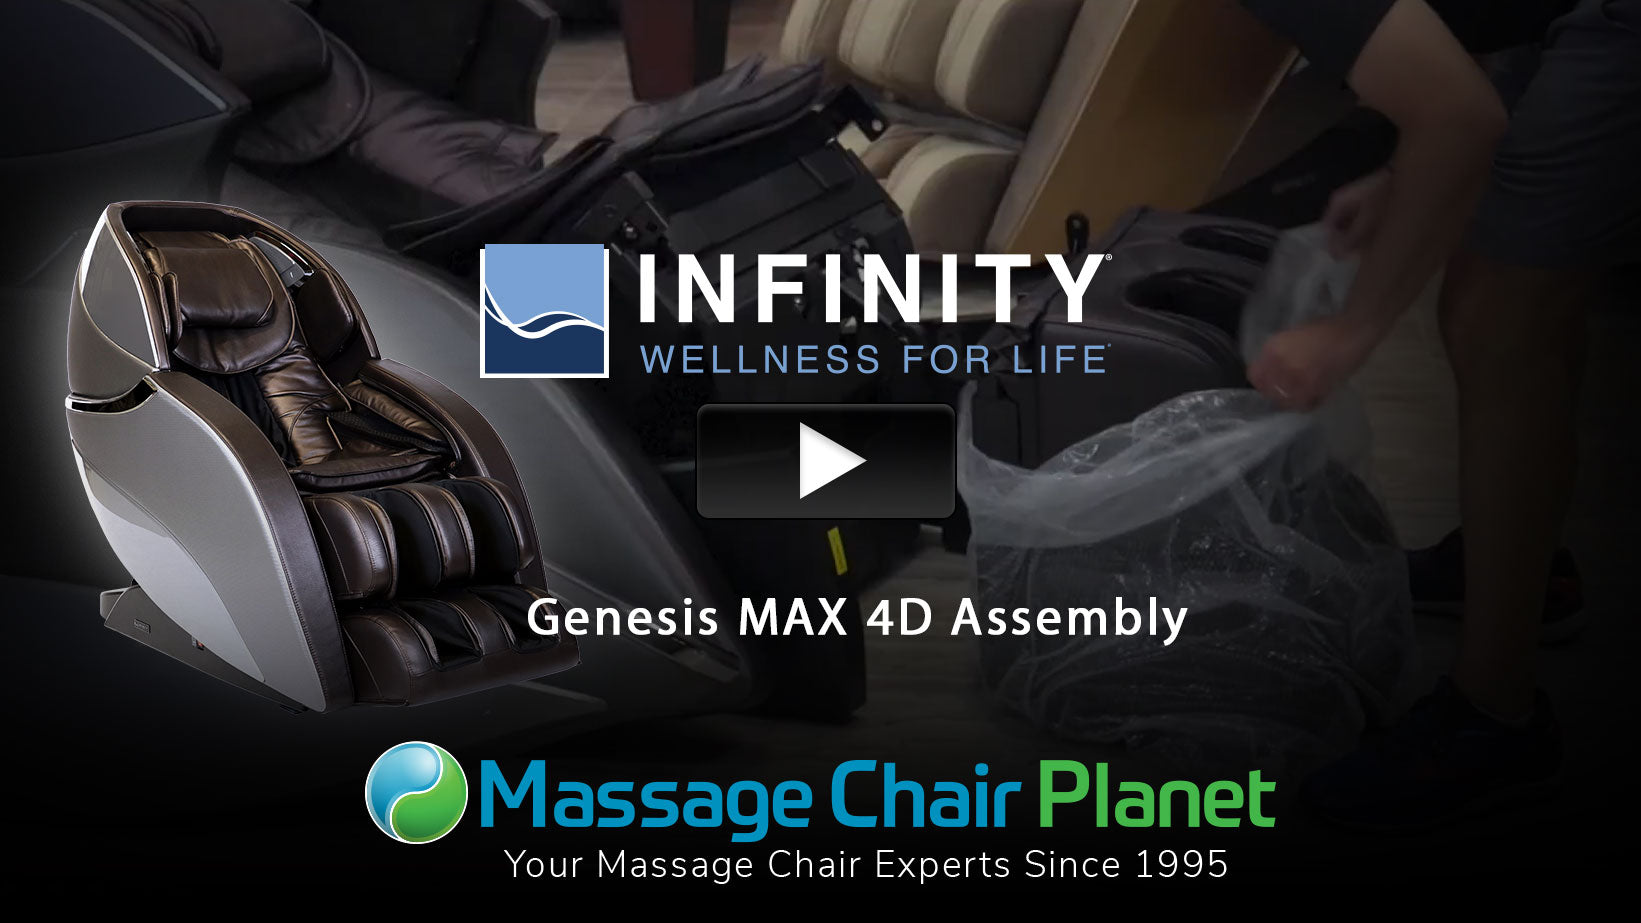 Infinity Genesis Max 4D Assembly Overview